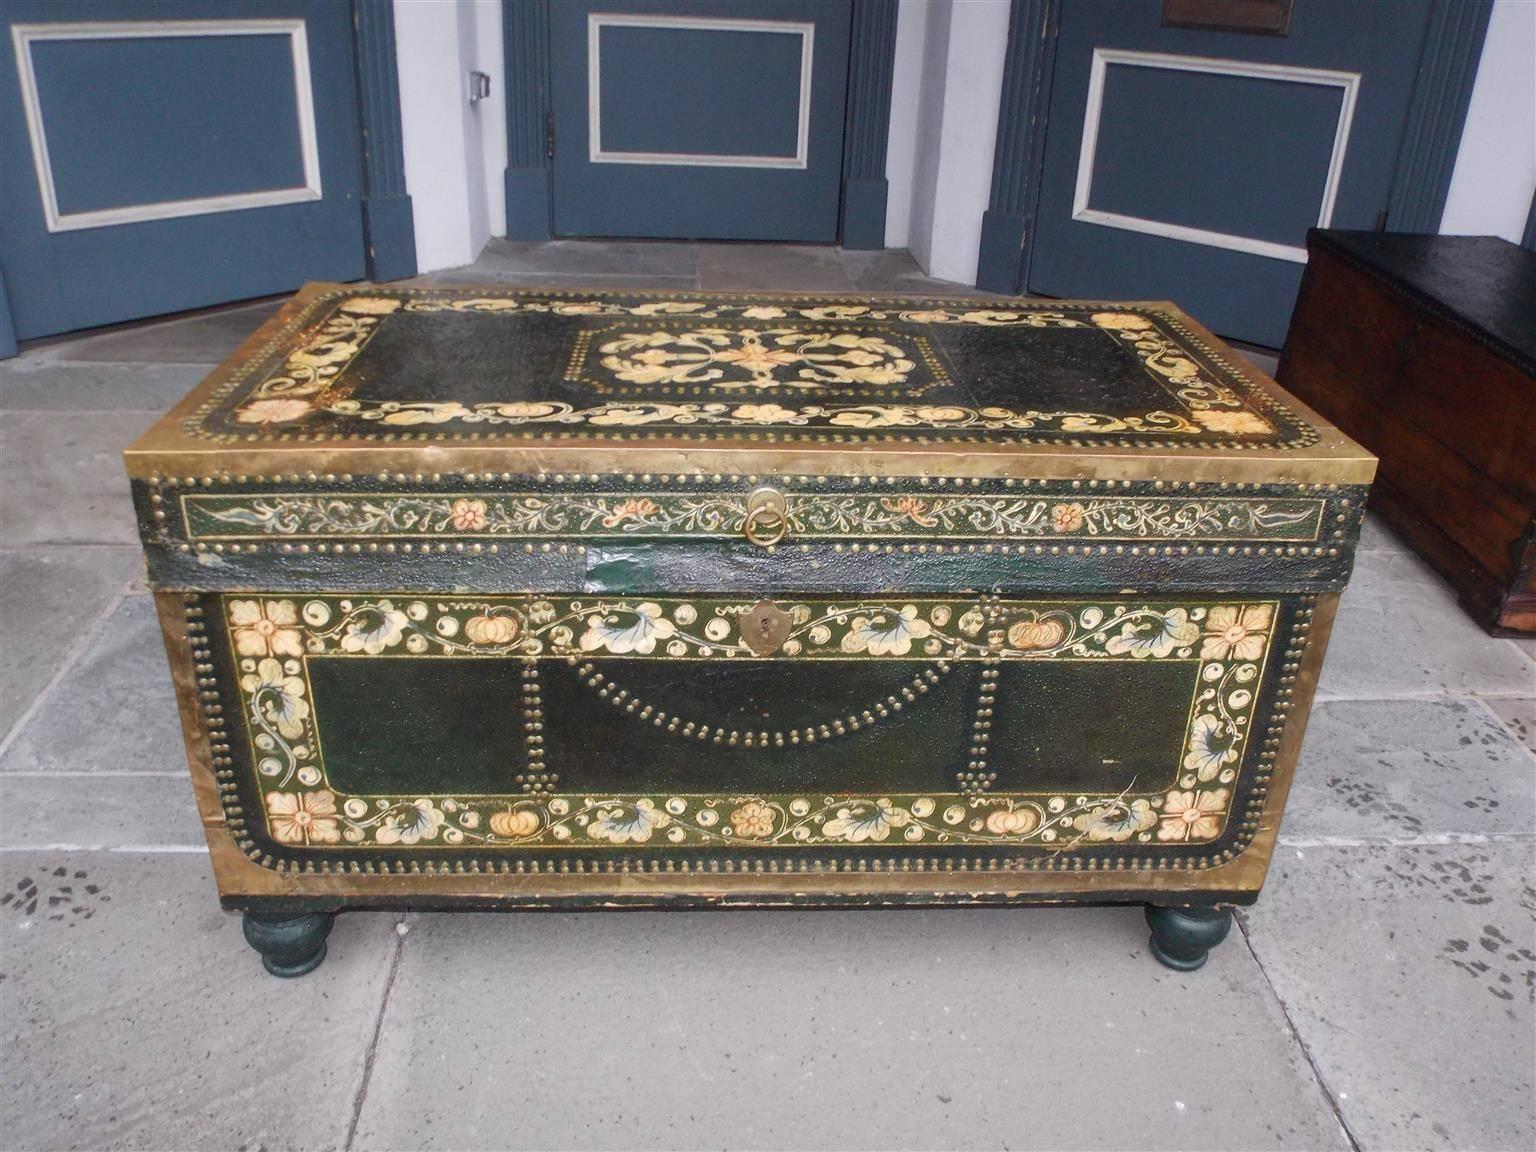 Chinese Campaign camphor wood hinged nautical chest covered in hand painted floral leather with brass studs, mounts, side handles, and terminating on the original bulbous painted bun feet, Early 19th century.